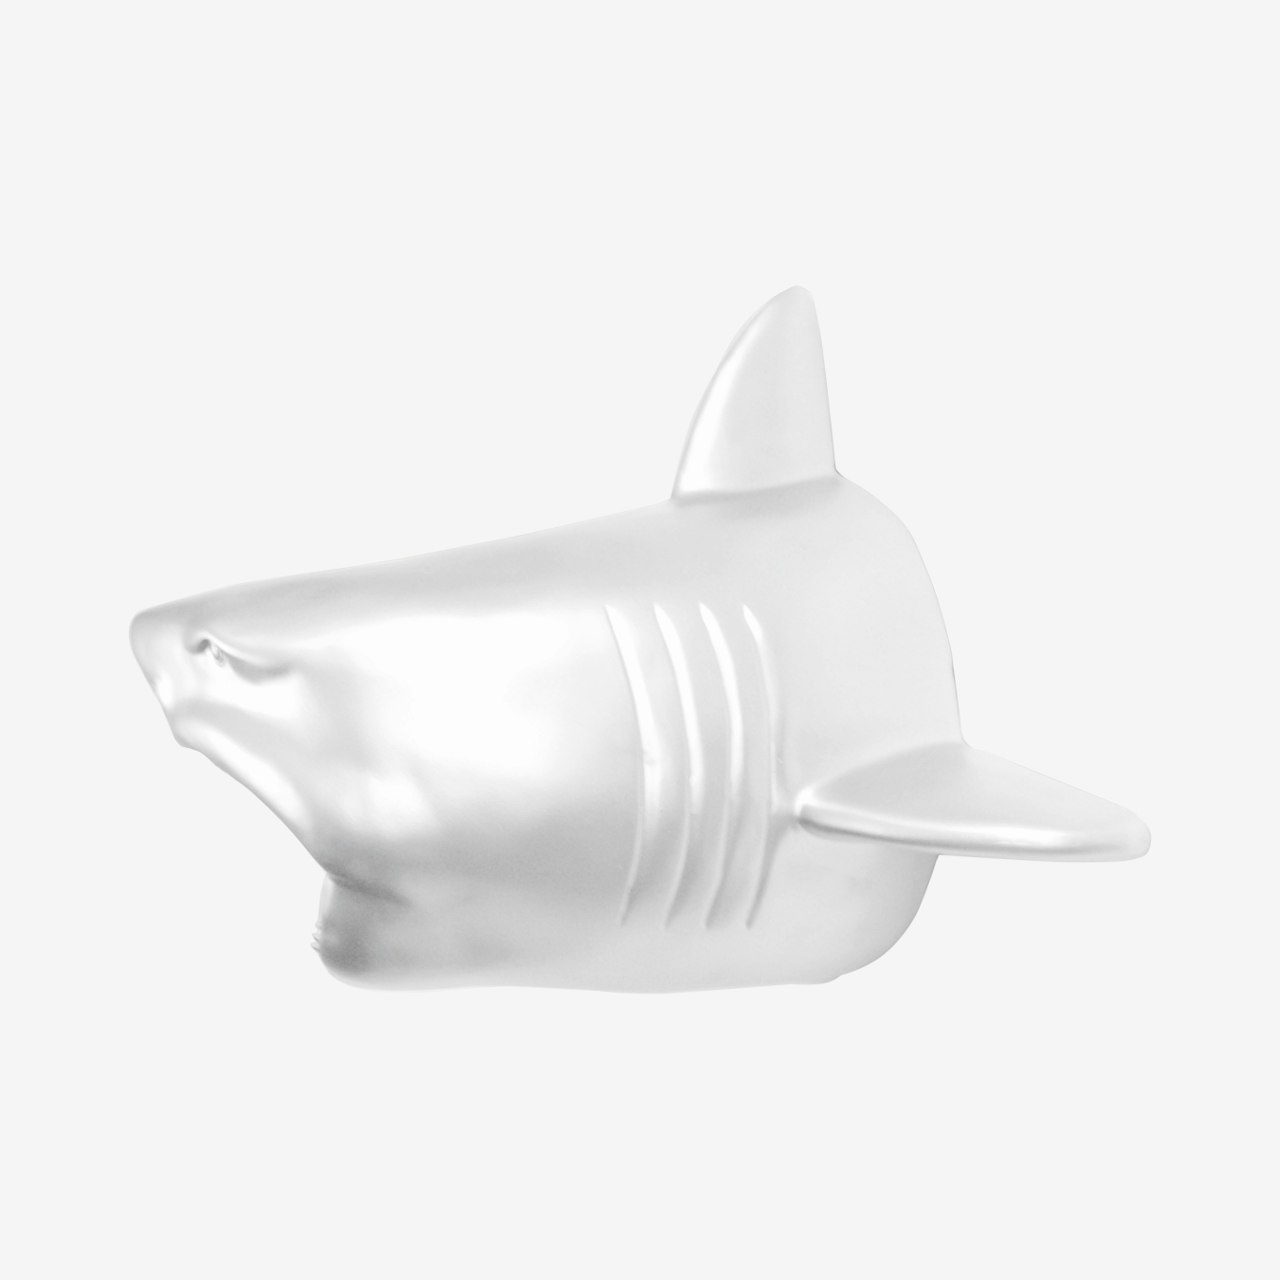 Faux Shark Wall Mount - Silver by Near and Deer - Fy